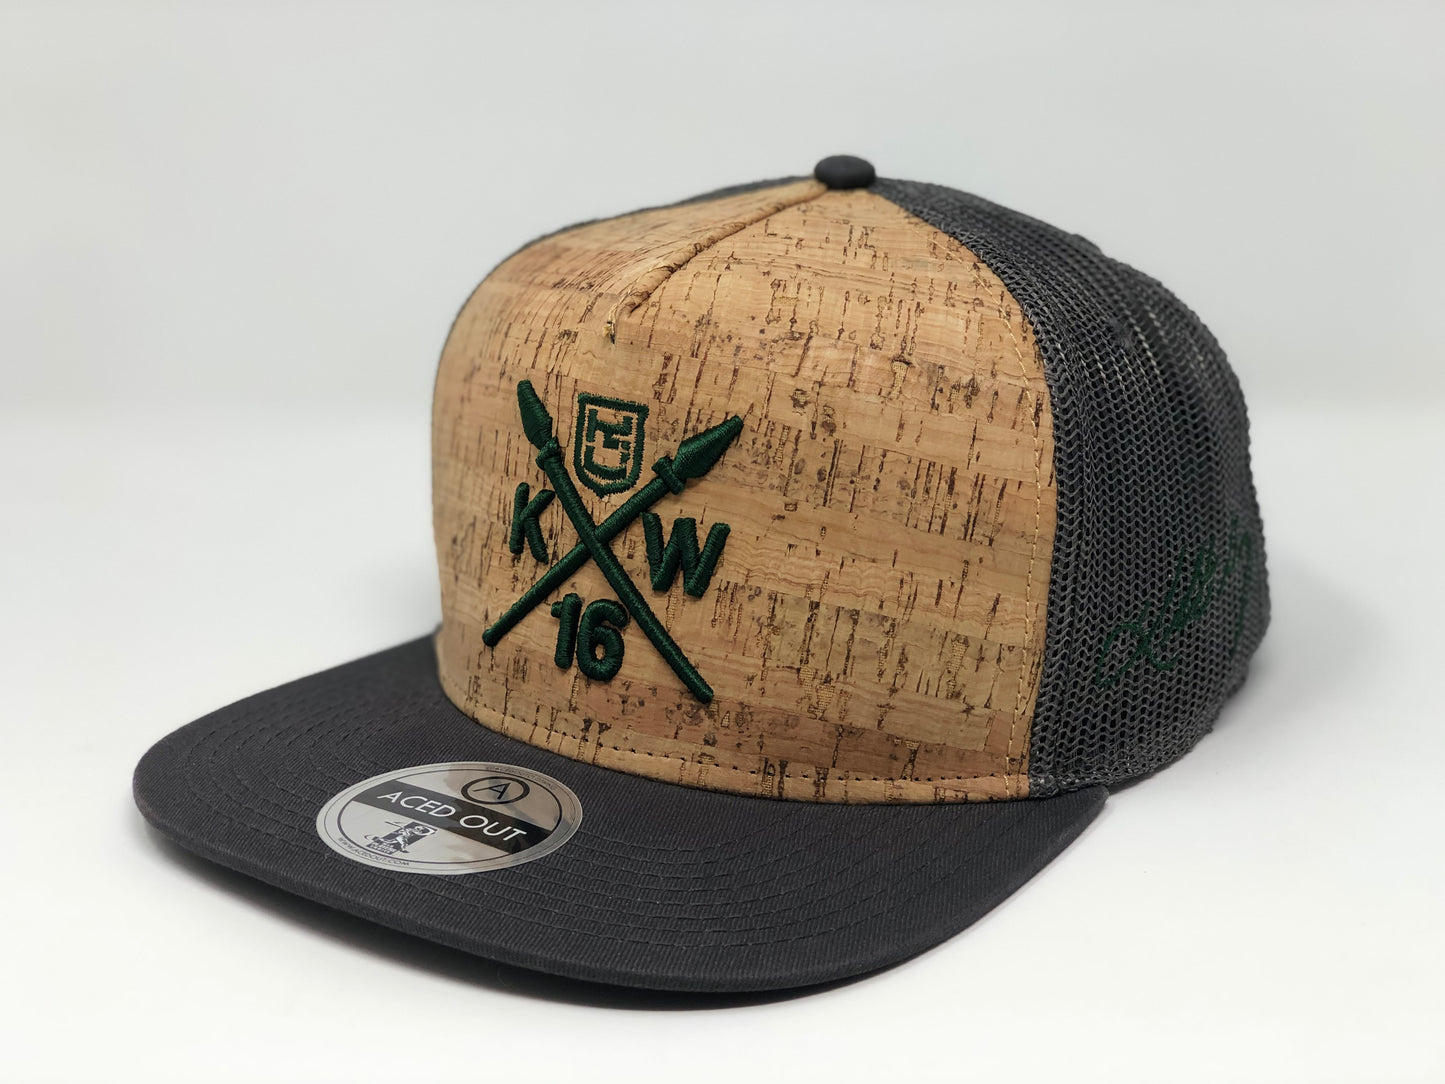 Kolten Wong KW16 Green Compass Hat - Grey/Cork Snapback - Limited Edition of 16